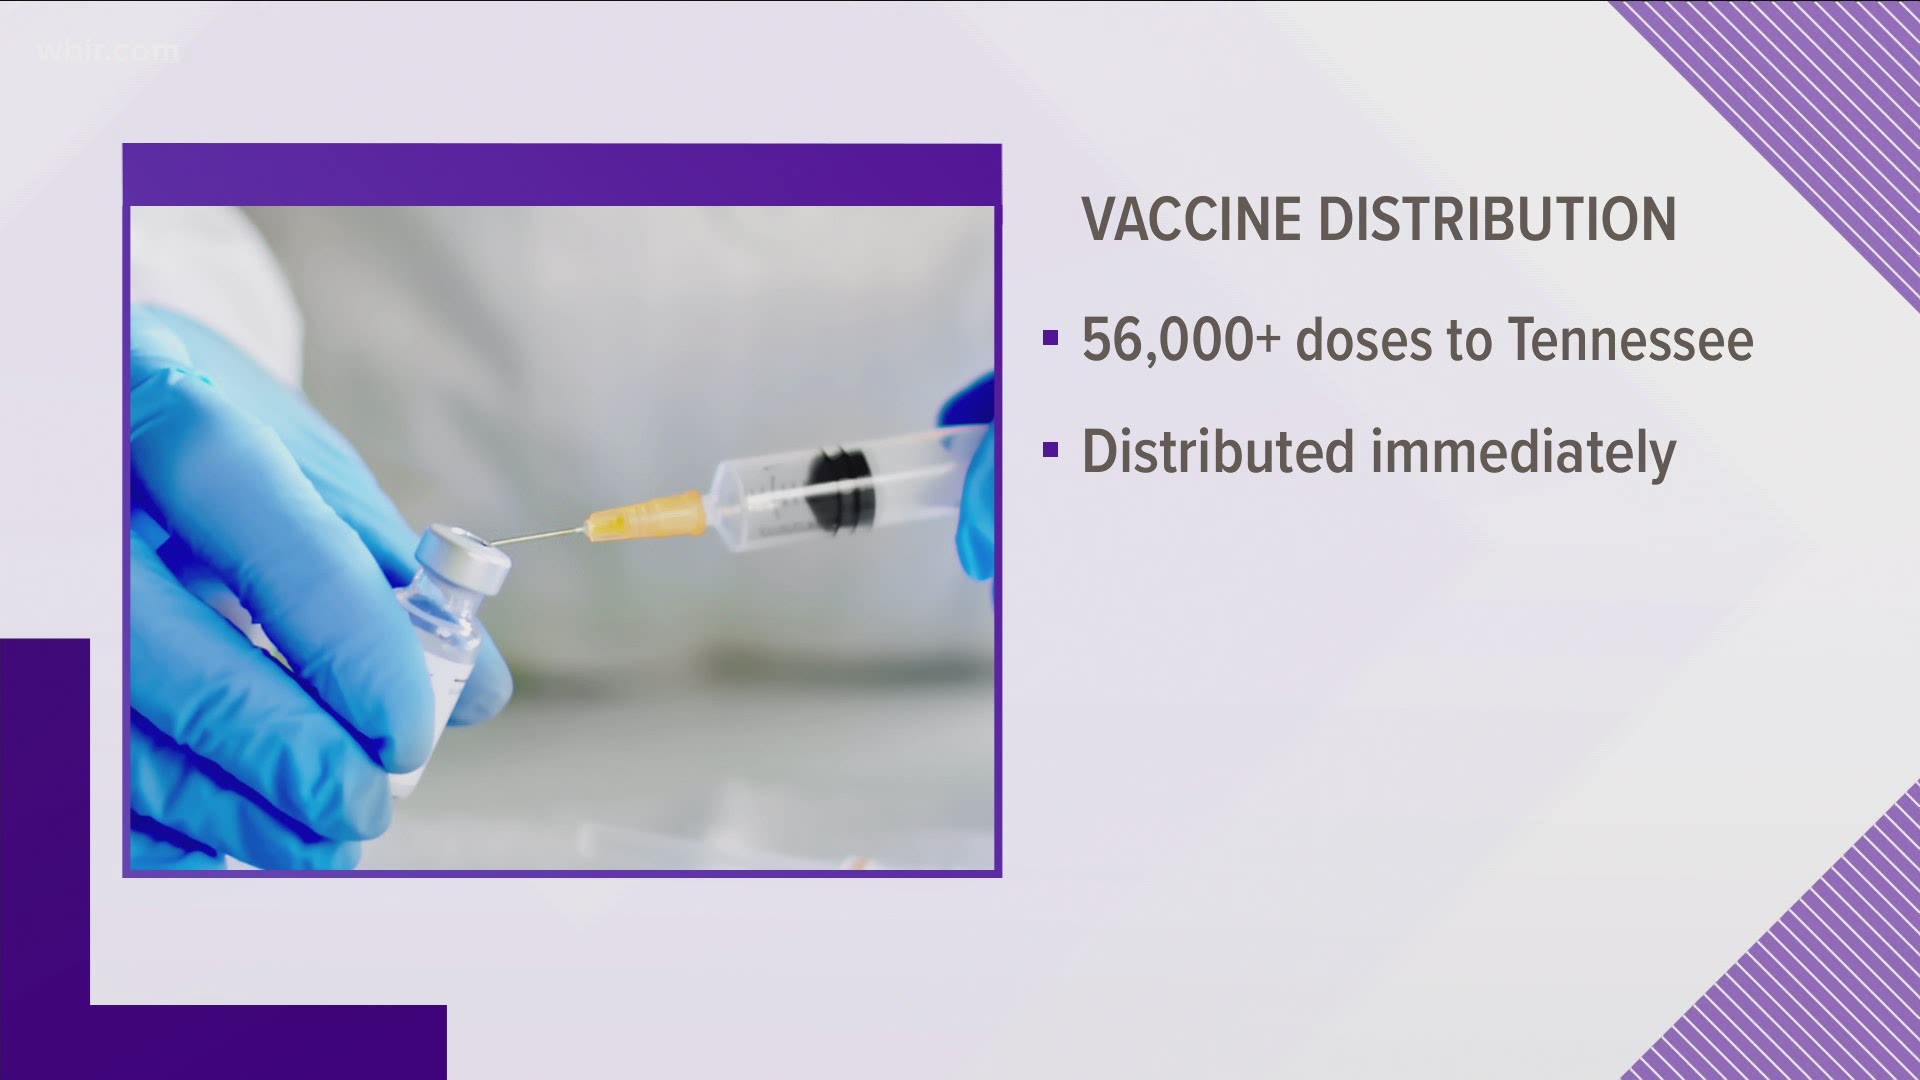 Tennessee is expected to get more than 56,000 doses of the Pfizer vaccine in the first allotment.